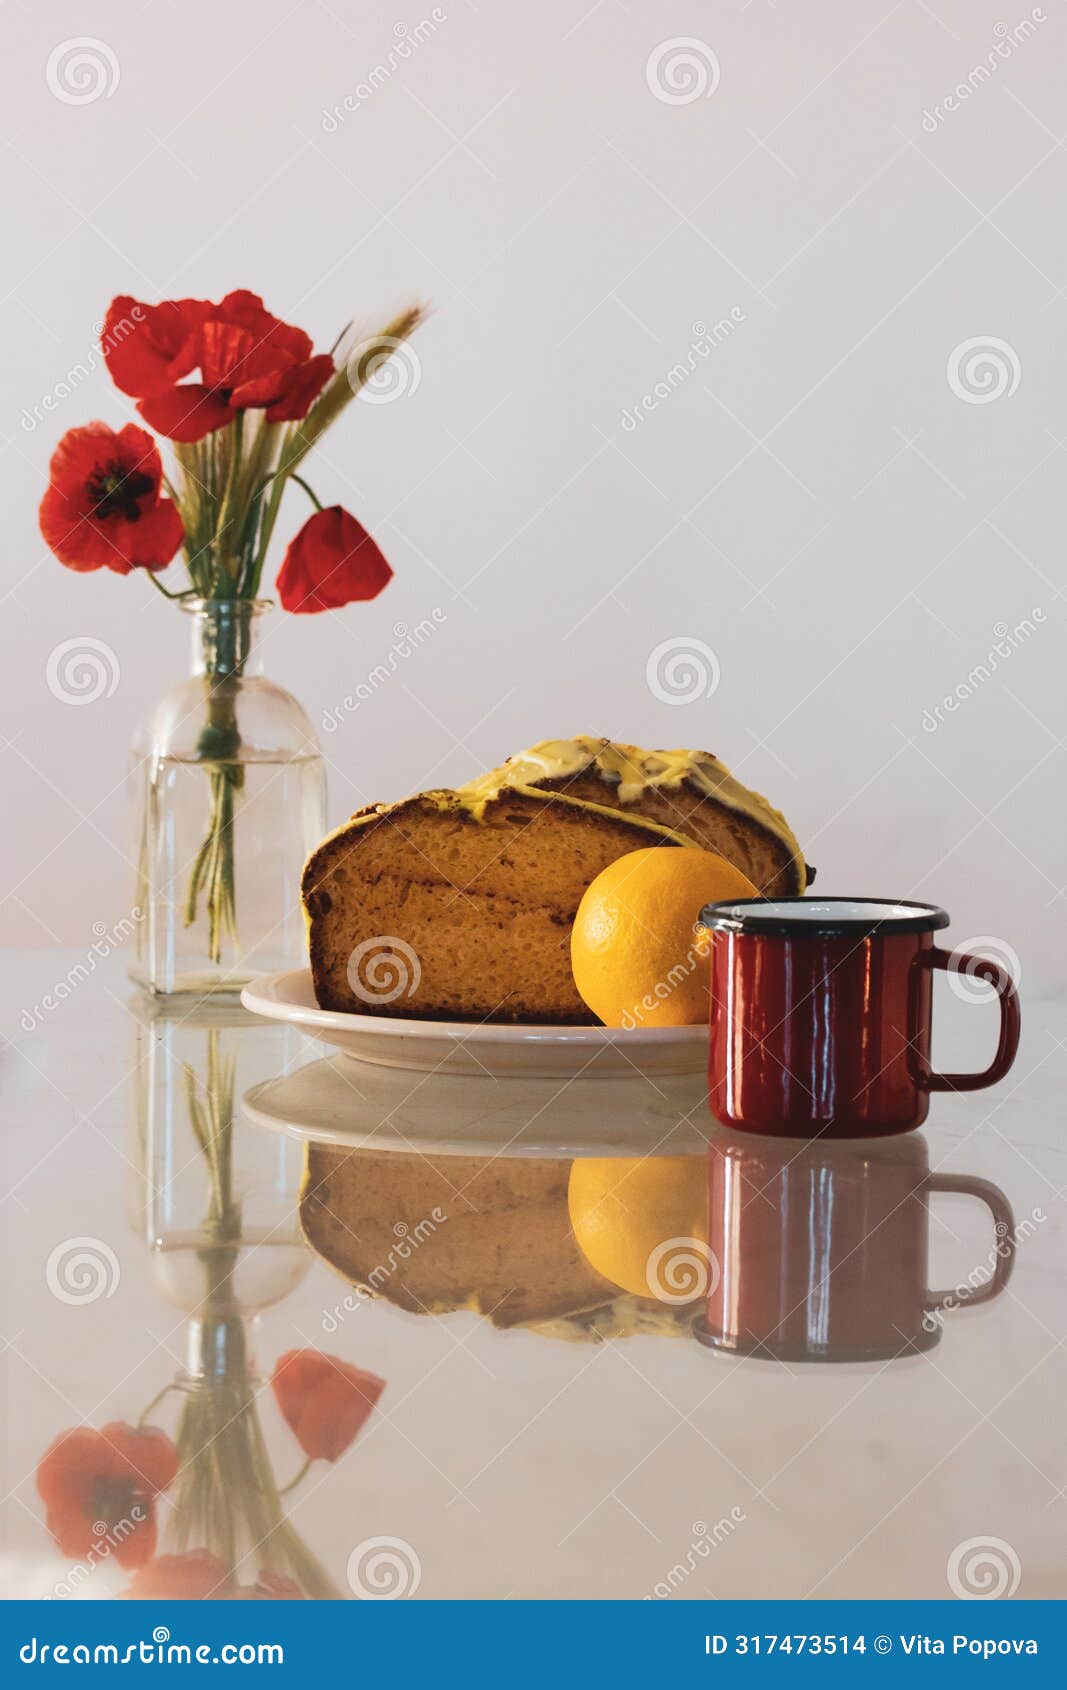 rural still life with red poppies in glass vase and a plate with biscocho bizcocho lemon muffin on kitchen table. sweet